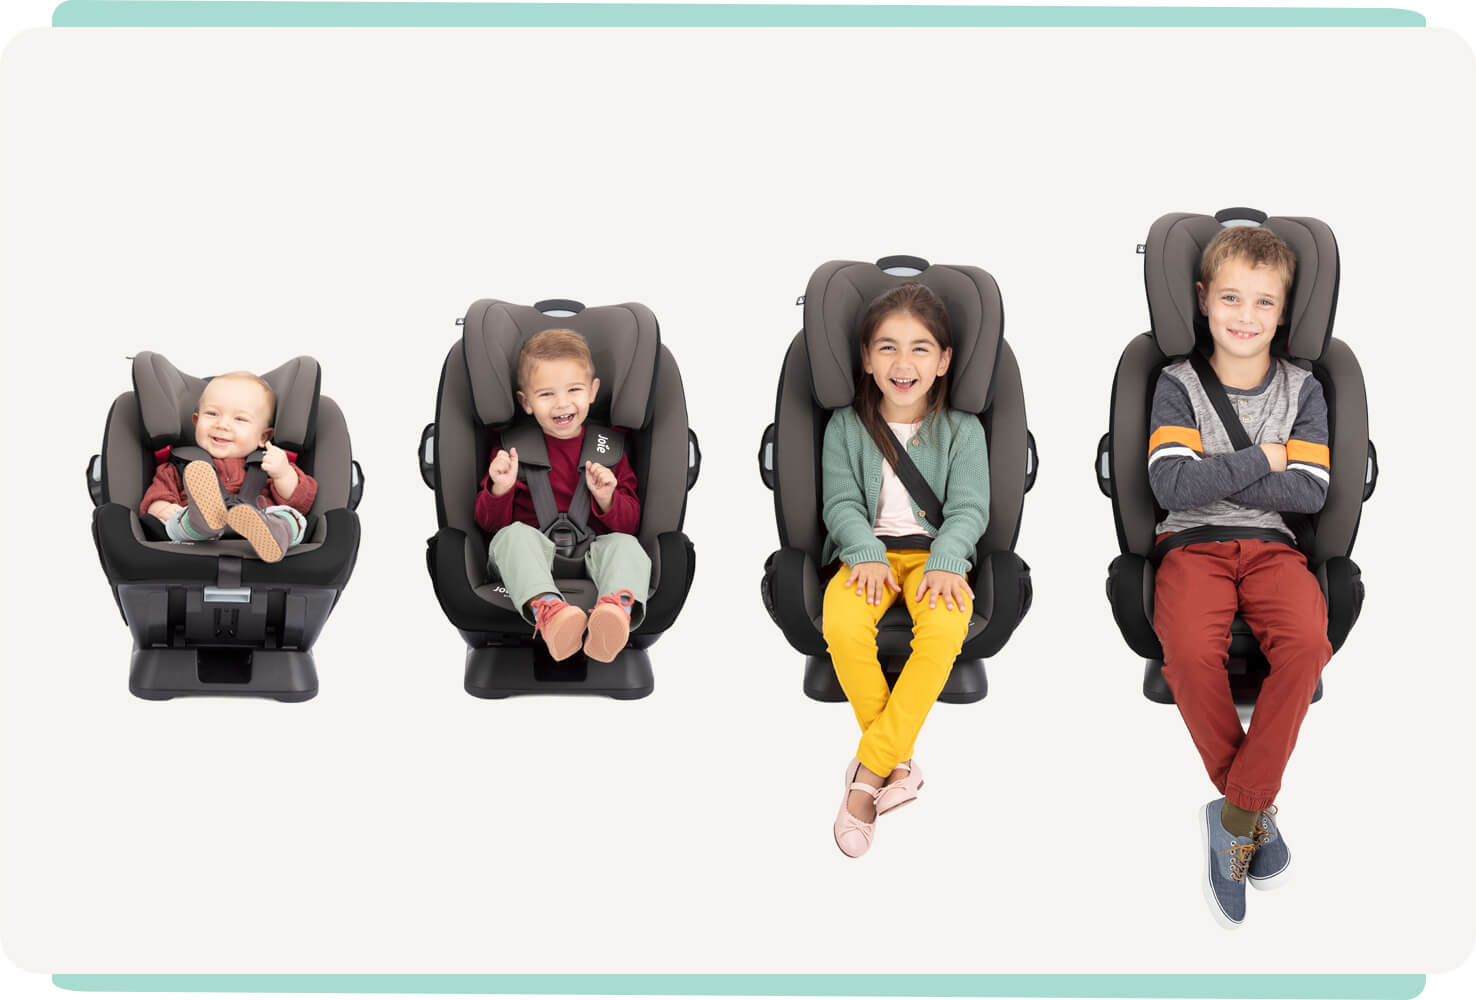  4 children of different ages sitting side by side in Joie Every Stage car seats: from left to right a baby, young toddler, young child, and older child.